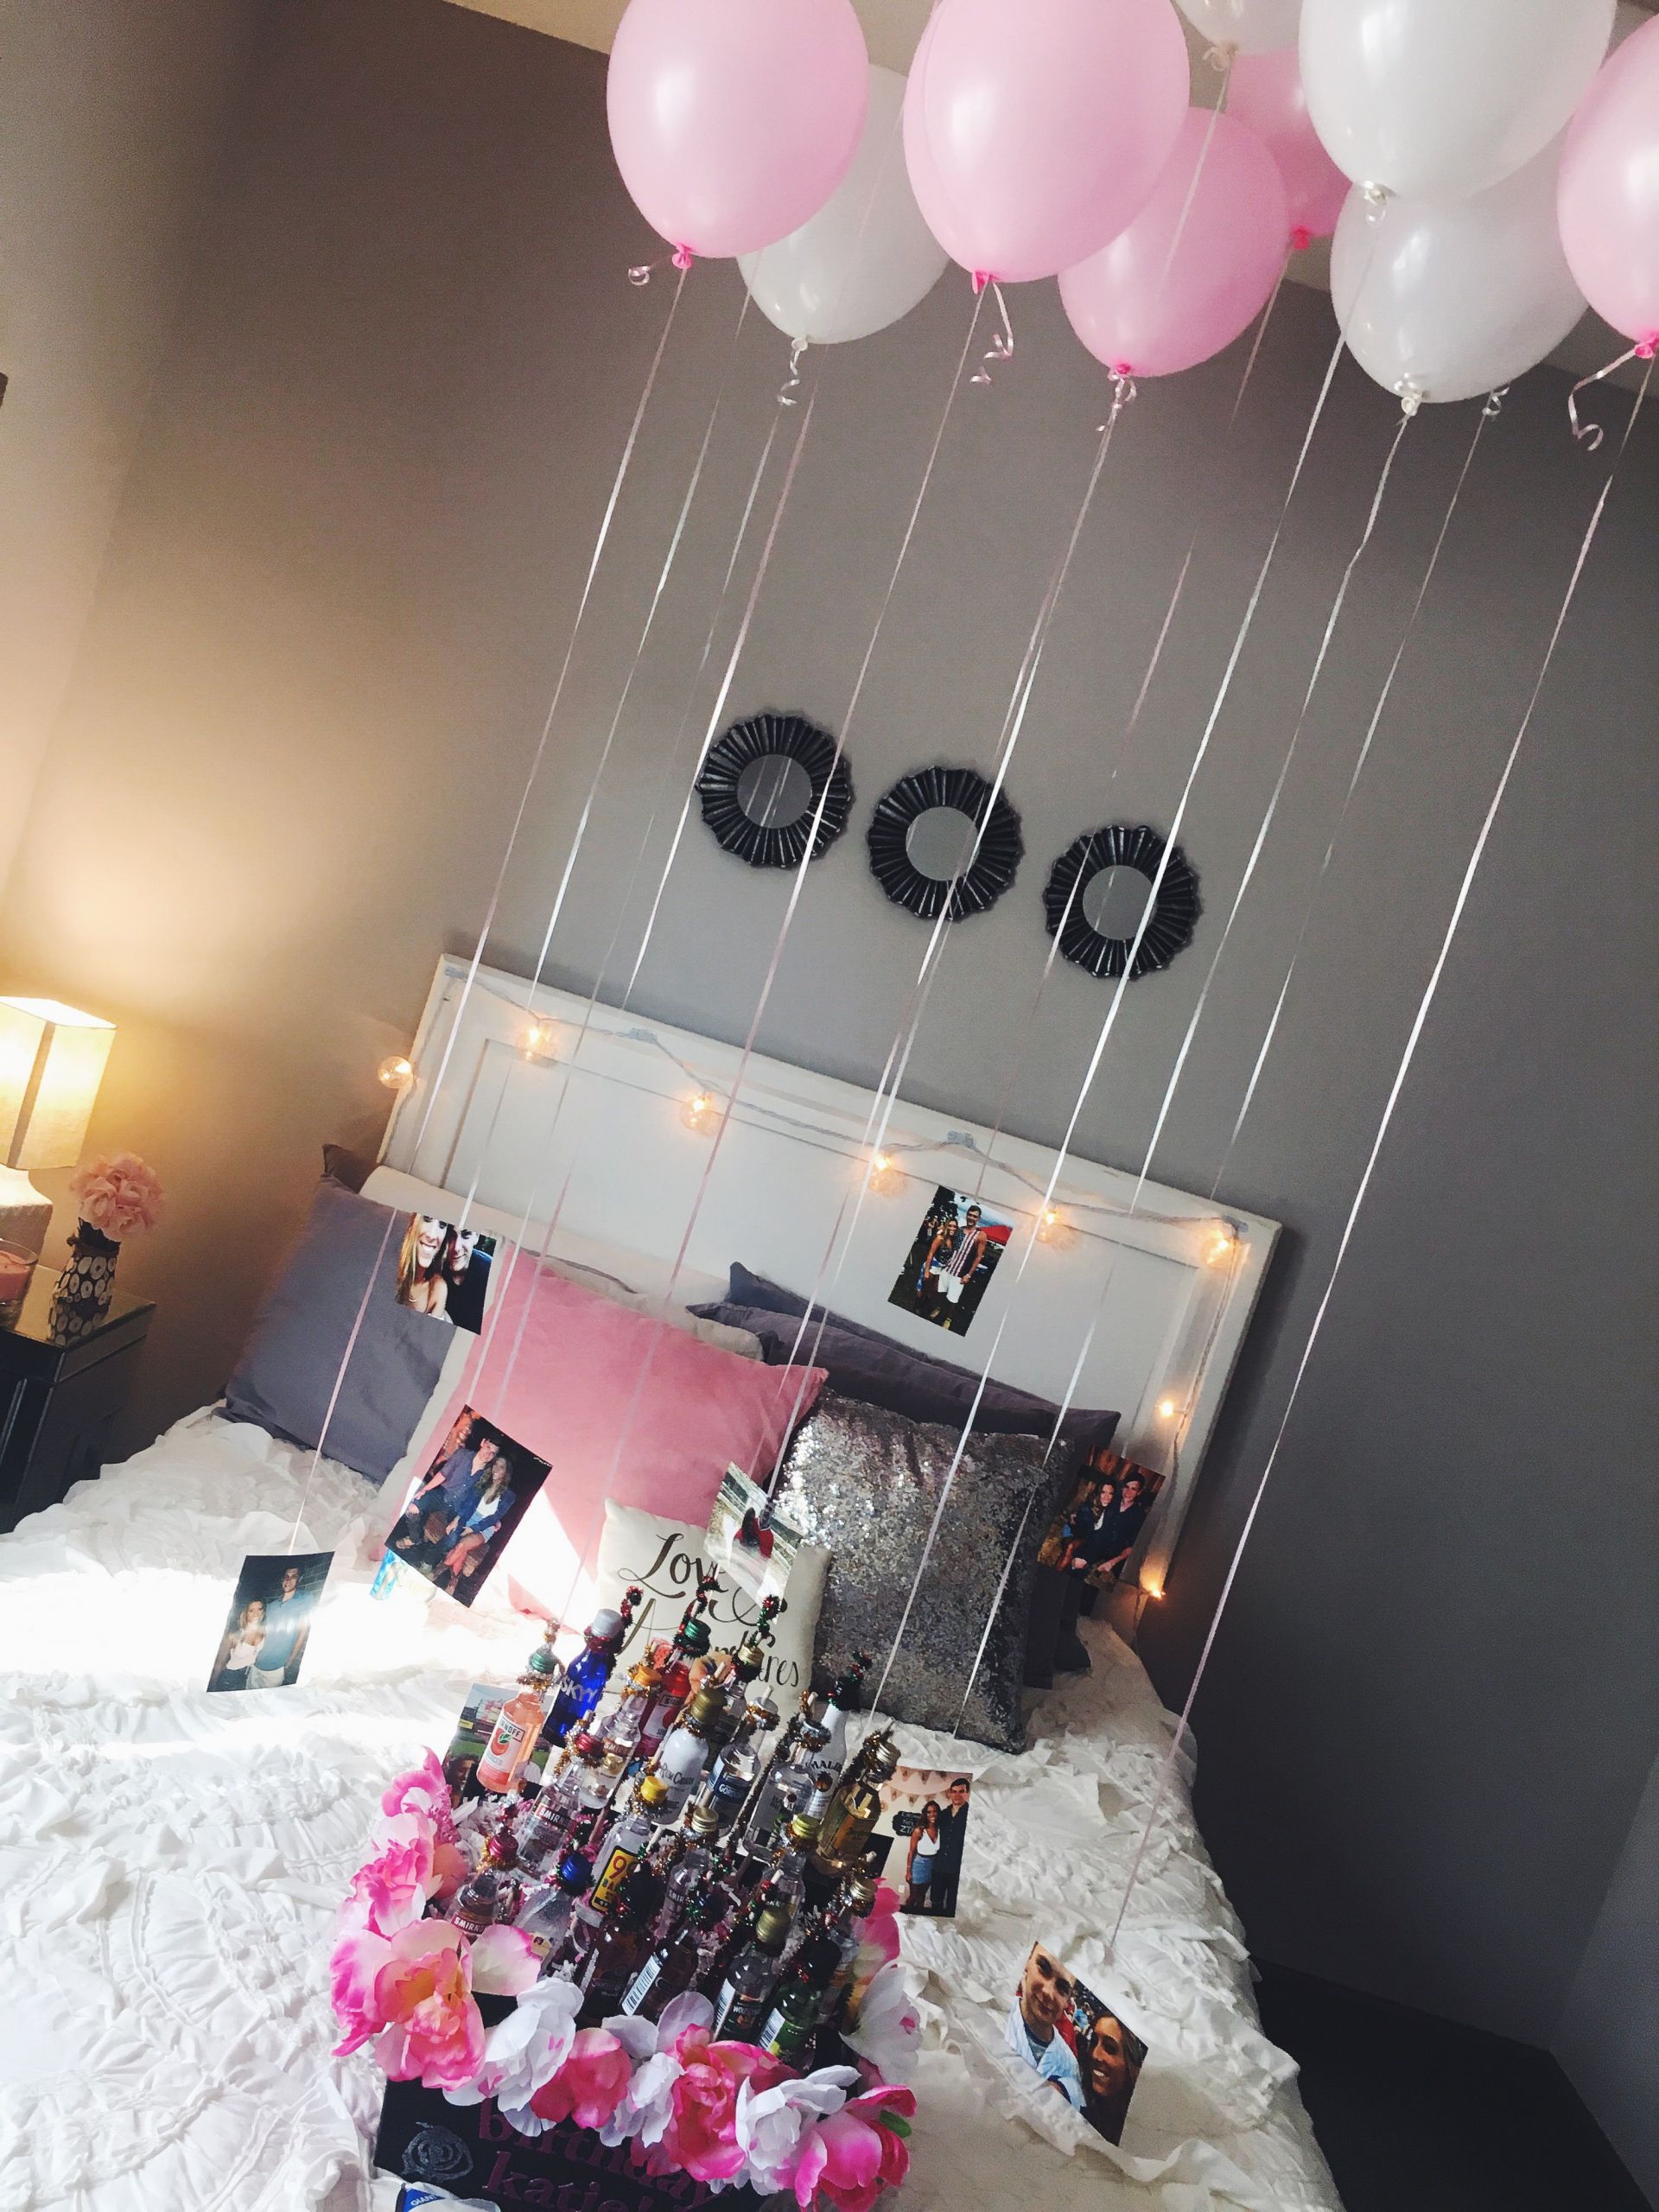 Birthday Gifts For Your Girlfriend
 easy and cute decorations for a friend or girlfriends 21st